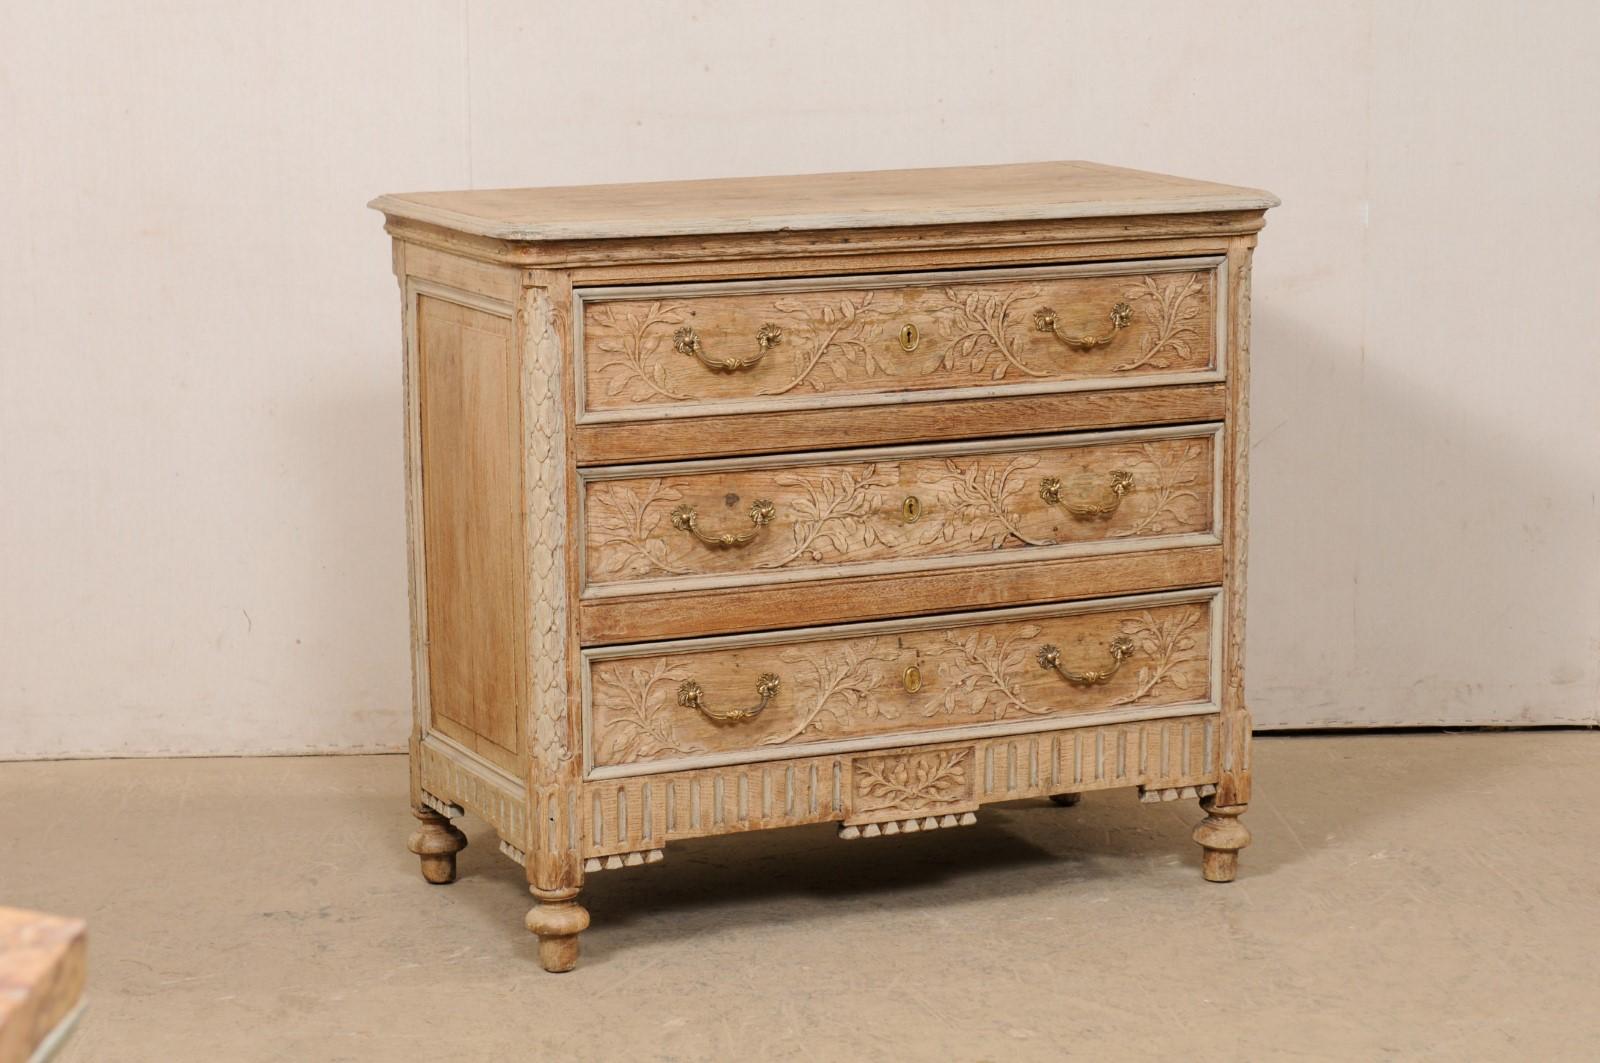 A French Neoclassical style, foliage-carved and bleached-wood chest of three-drawers from the early 19th century. This antique chest from France features a rectangular-shaped top with softly-rounded front corners, which rests atop a Neoclassic case